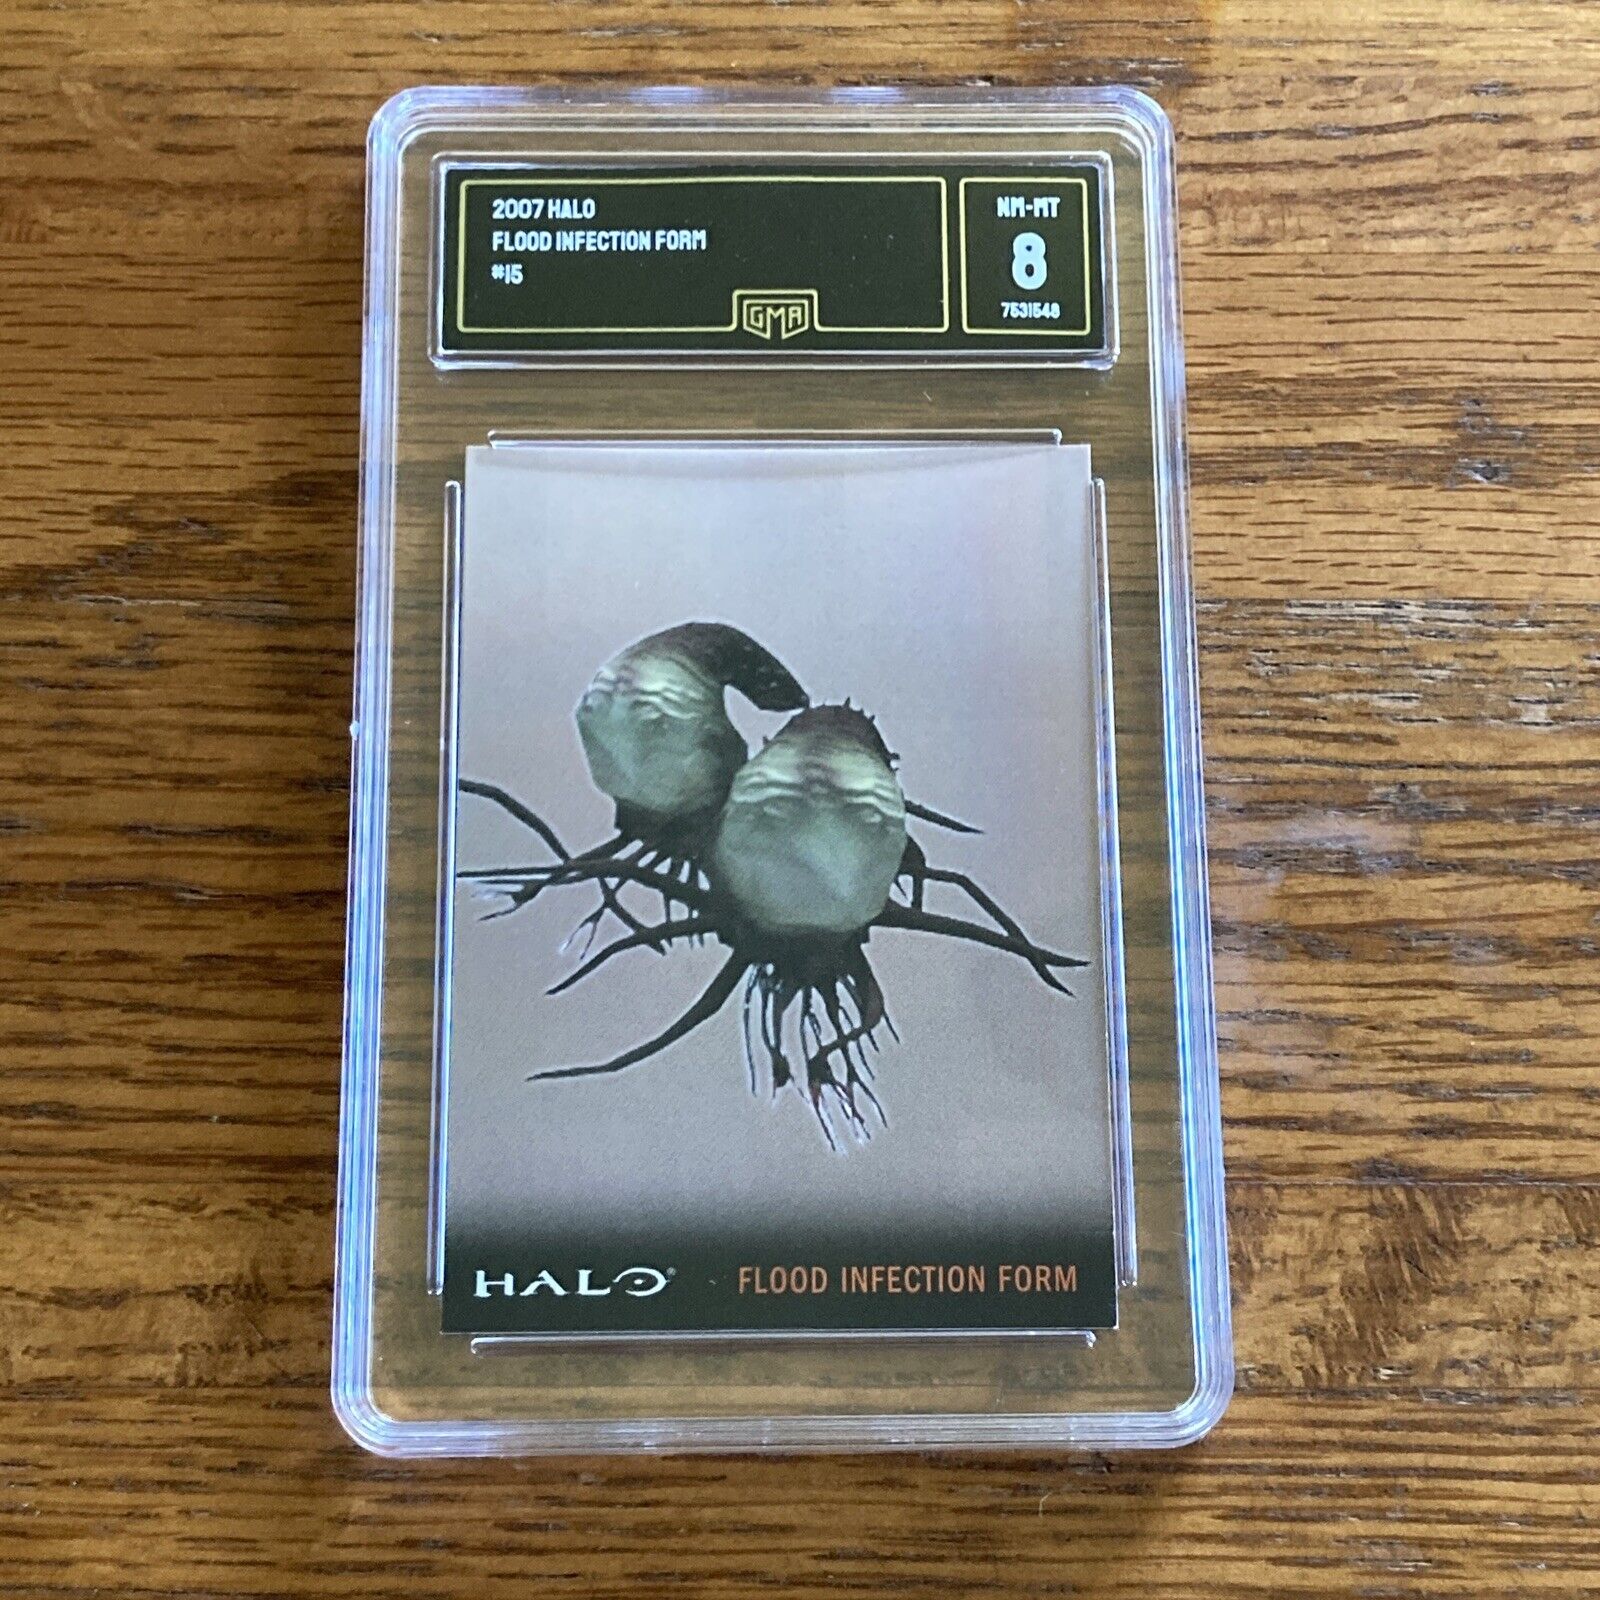 2007 Topps Halo Flood Infection Form #15 Graded Grading GMA 8 Video Game Card